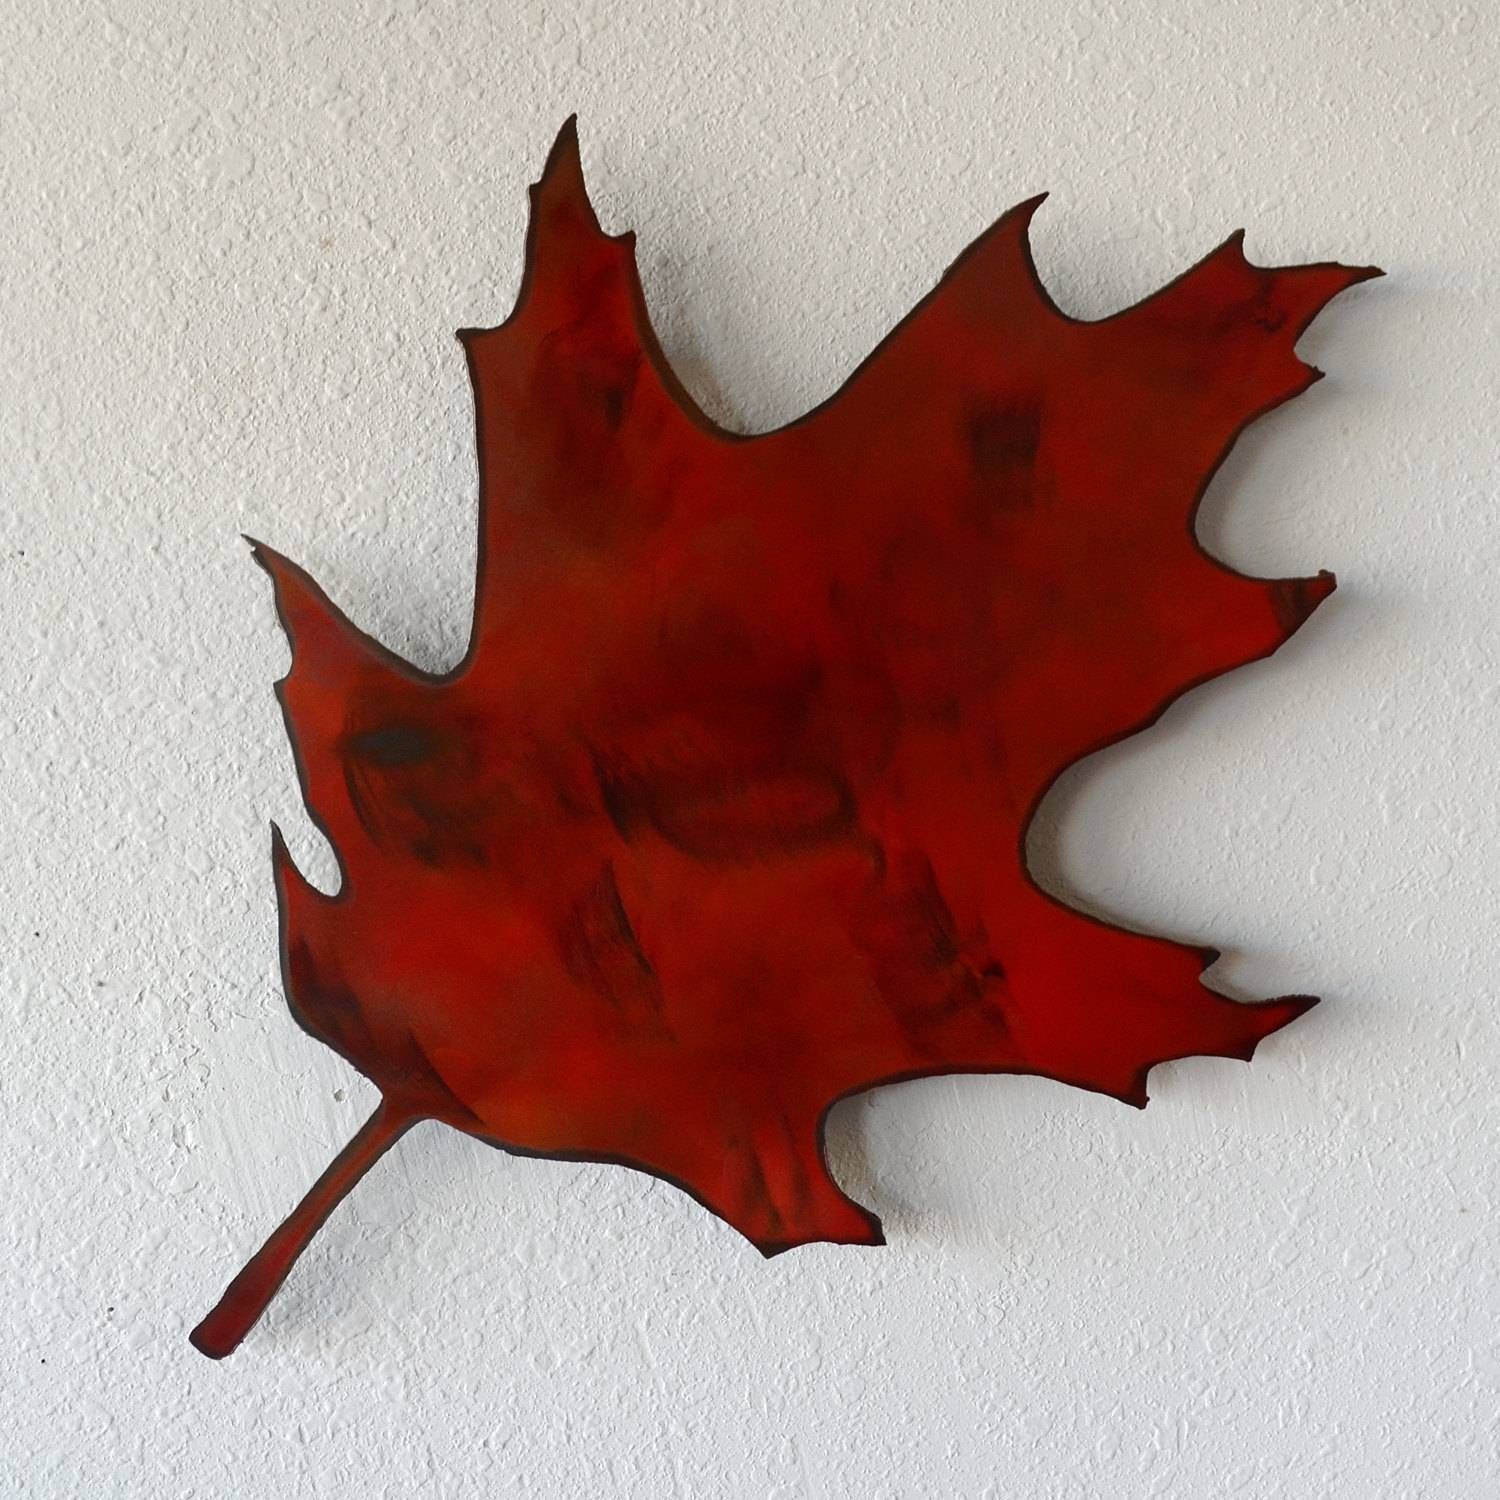 Metal Maple Leaf Wall Hanging Maple Leaf Maple Leaf Note With Recent Oak Tree Metal Wall Art (View 23 of 30)